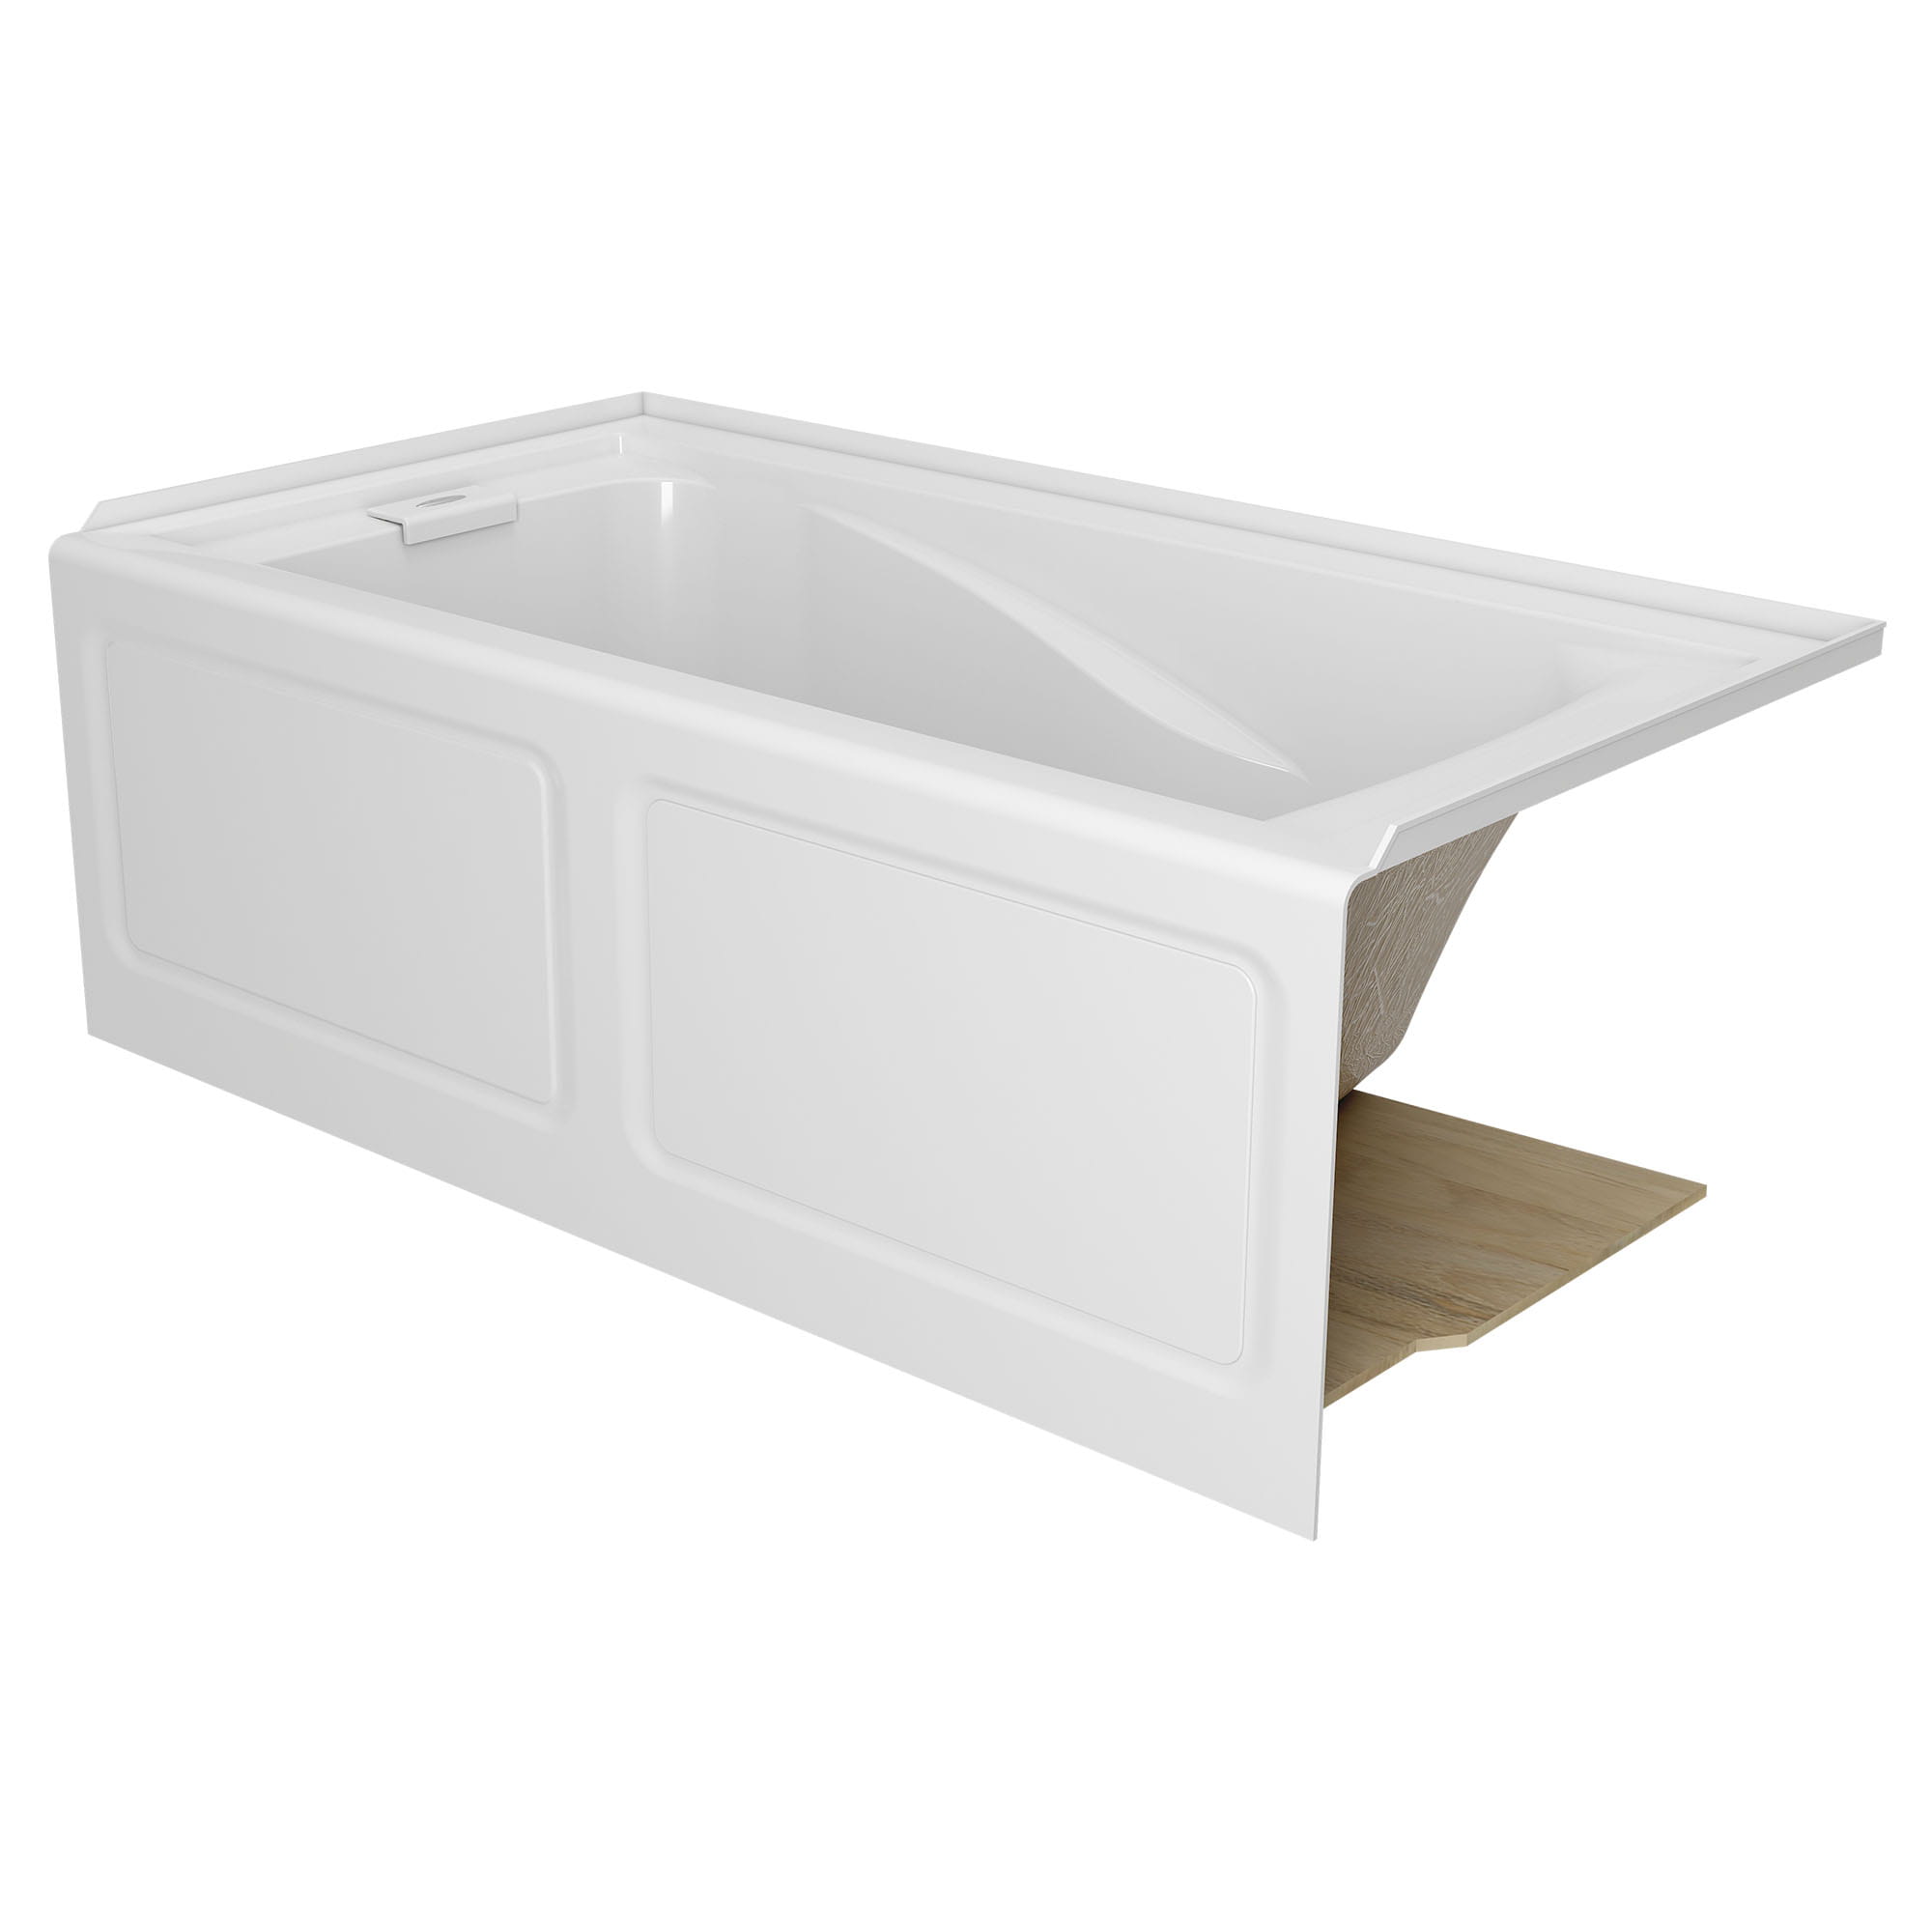 EverClean 60x32-Inch Integral Apron Deep Soak Bathtub with Left-Hand Outlet